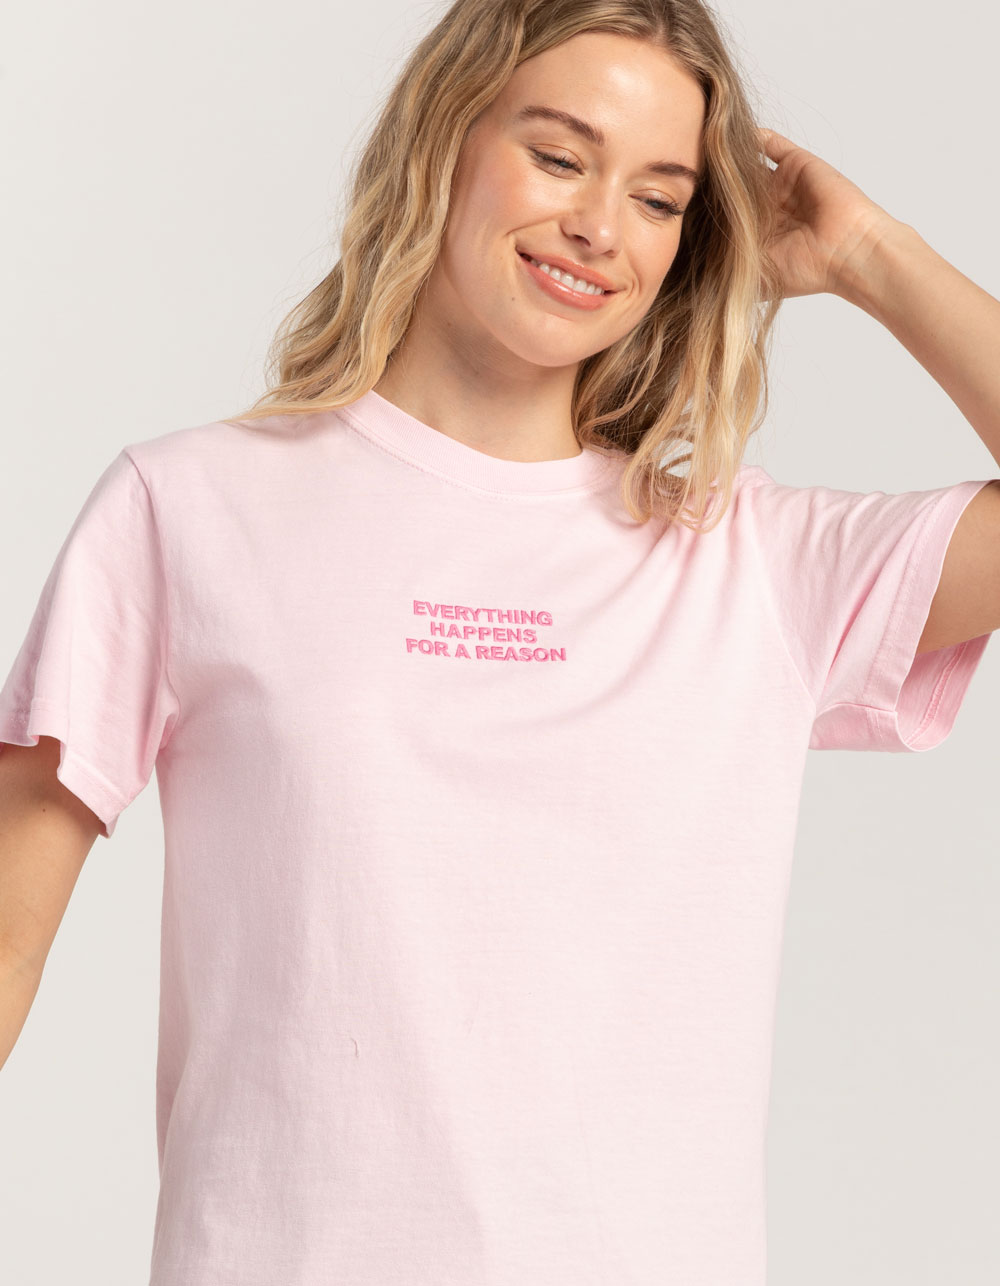 RIOT SOCIETY Happens For A Reason Womens Tee - PINK | Tillys